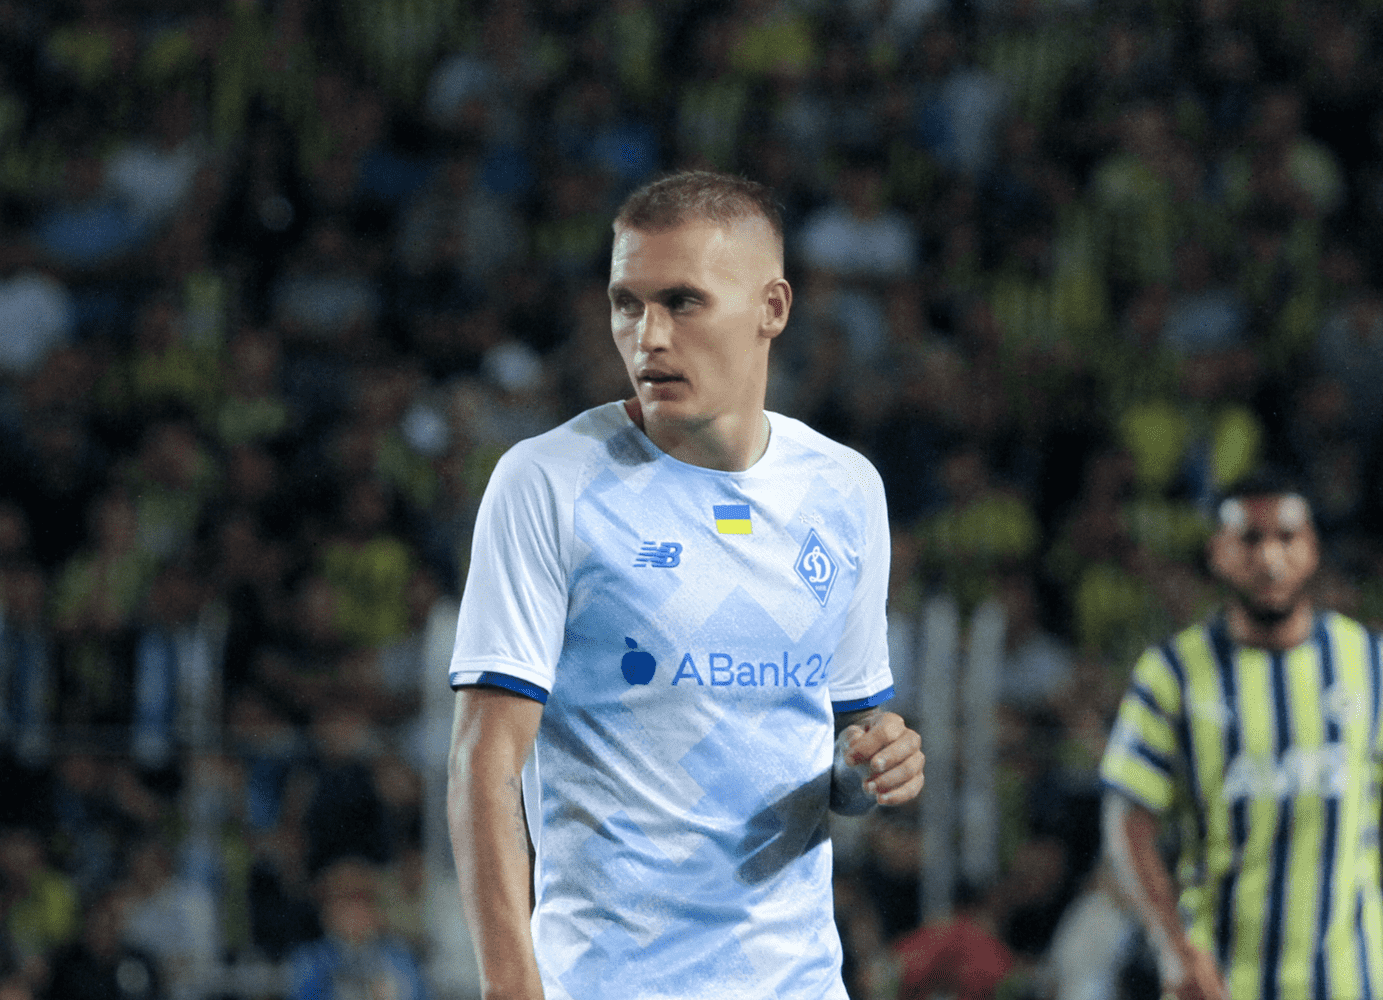 Vitaliy Buialskyi: “We deserved this victory”